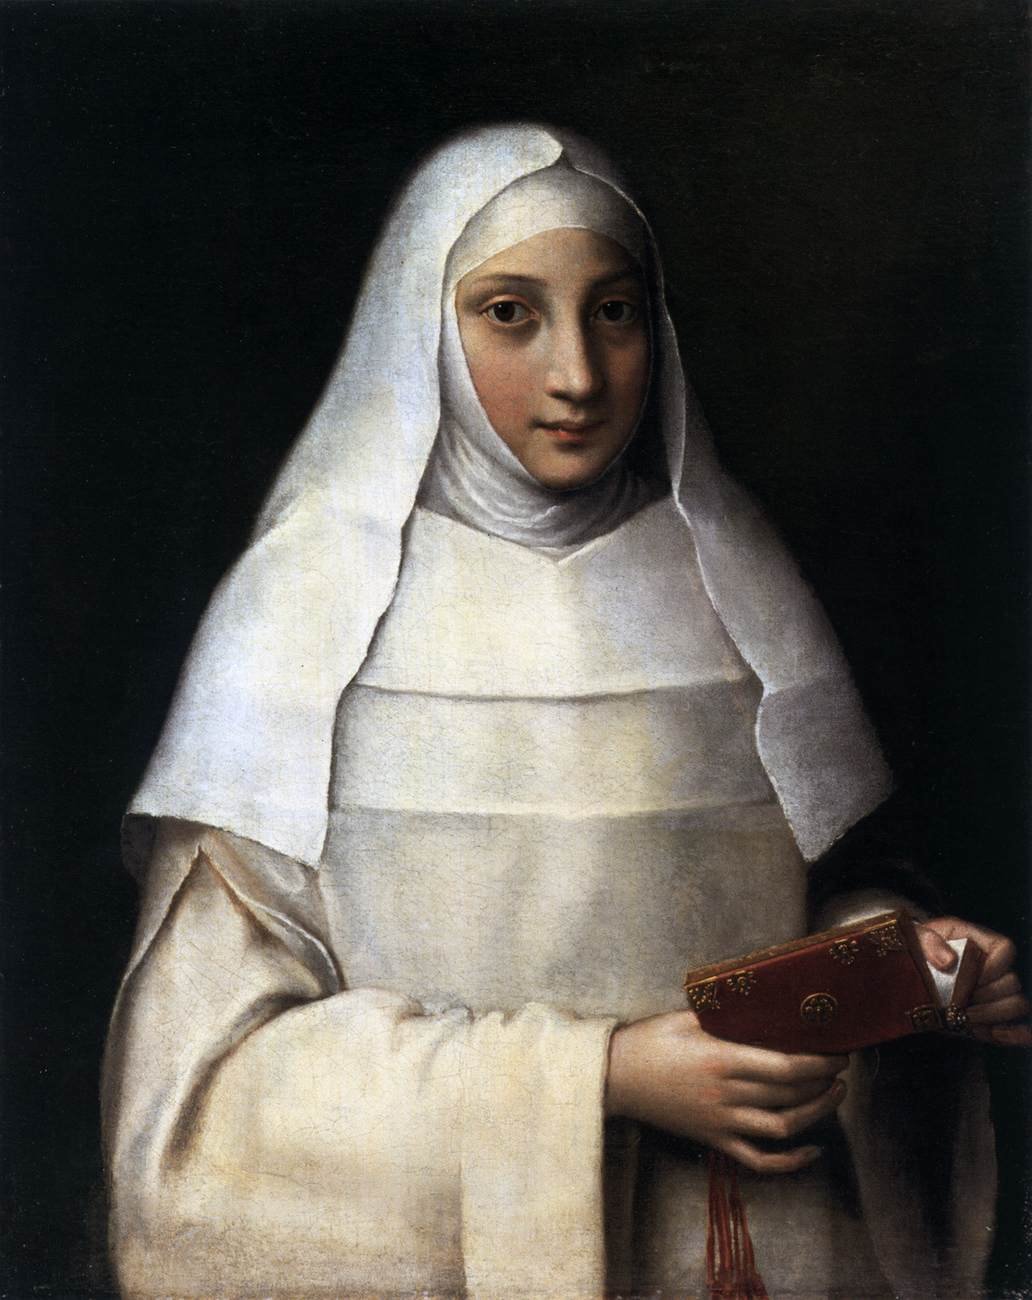 SOFONISBA ANGUISSOLA (C.1535–1625), THE ARTIST’S SISTER IN THE GARB OF A NUN, 1551, SOUTHAMPTON CITY ART GALLERY, UNITED KINGDOM